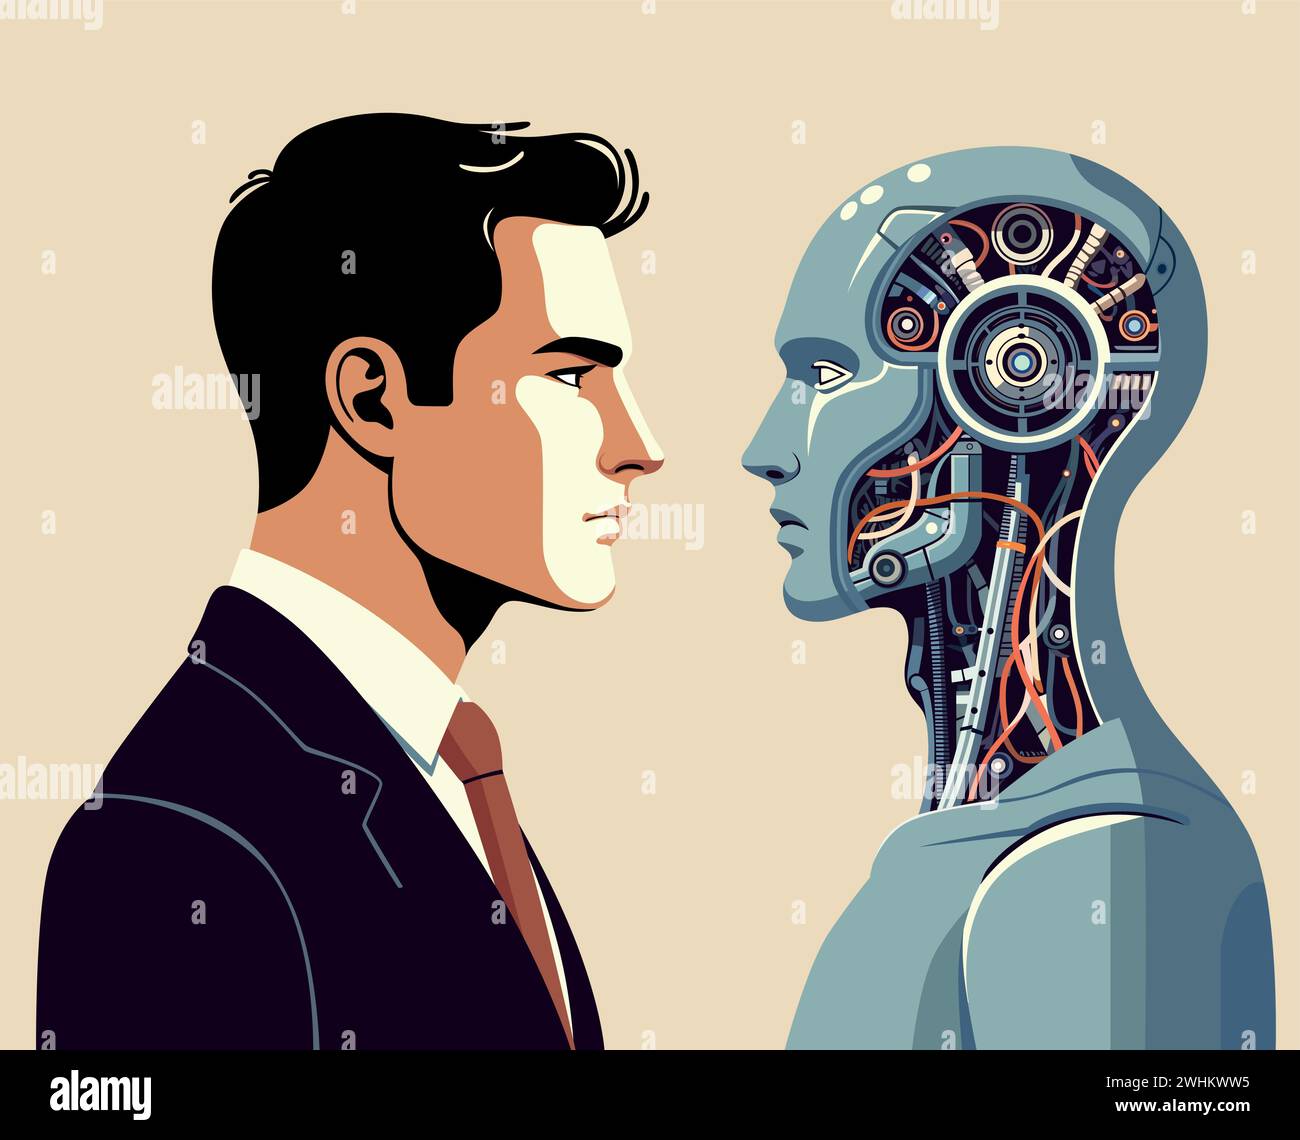 Art deco style illustration of a human facing an android, highlighting the contrast between man and machine. Stock Vector